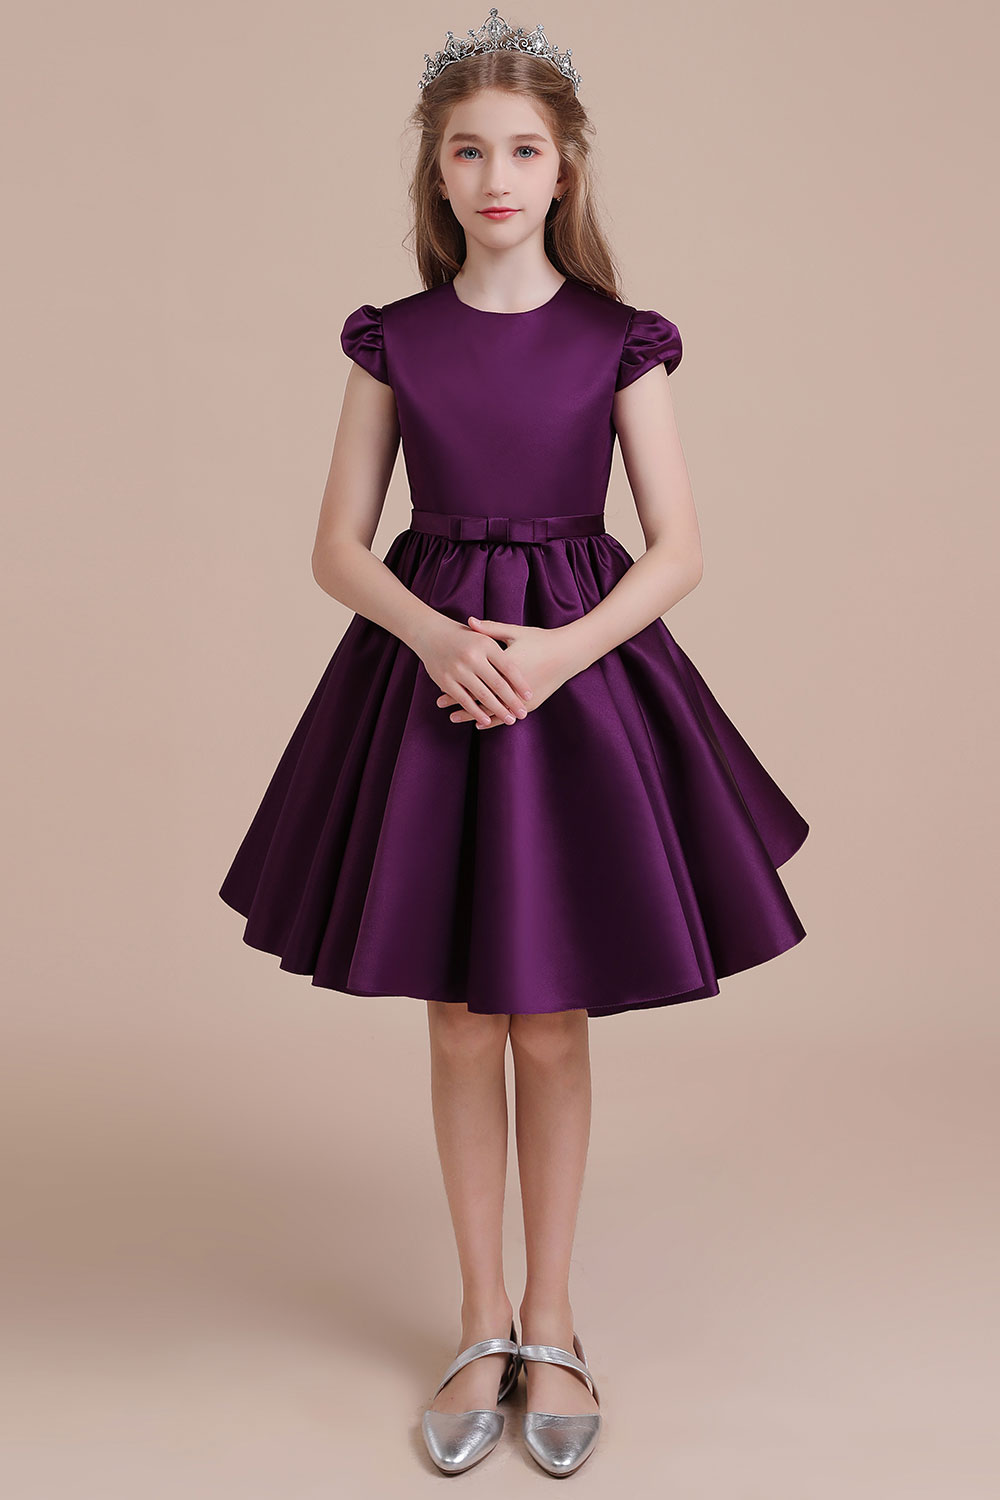 Dresseswow Graceful Cap Sleeves Satin A-line Flower Girl Dress with Ribbons